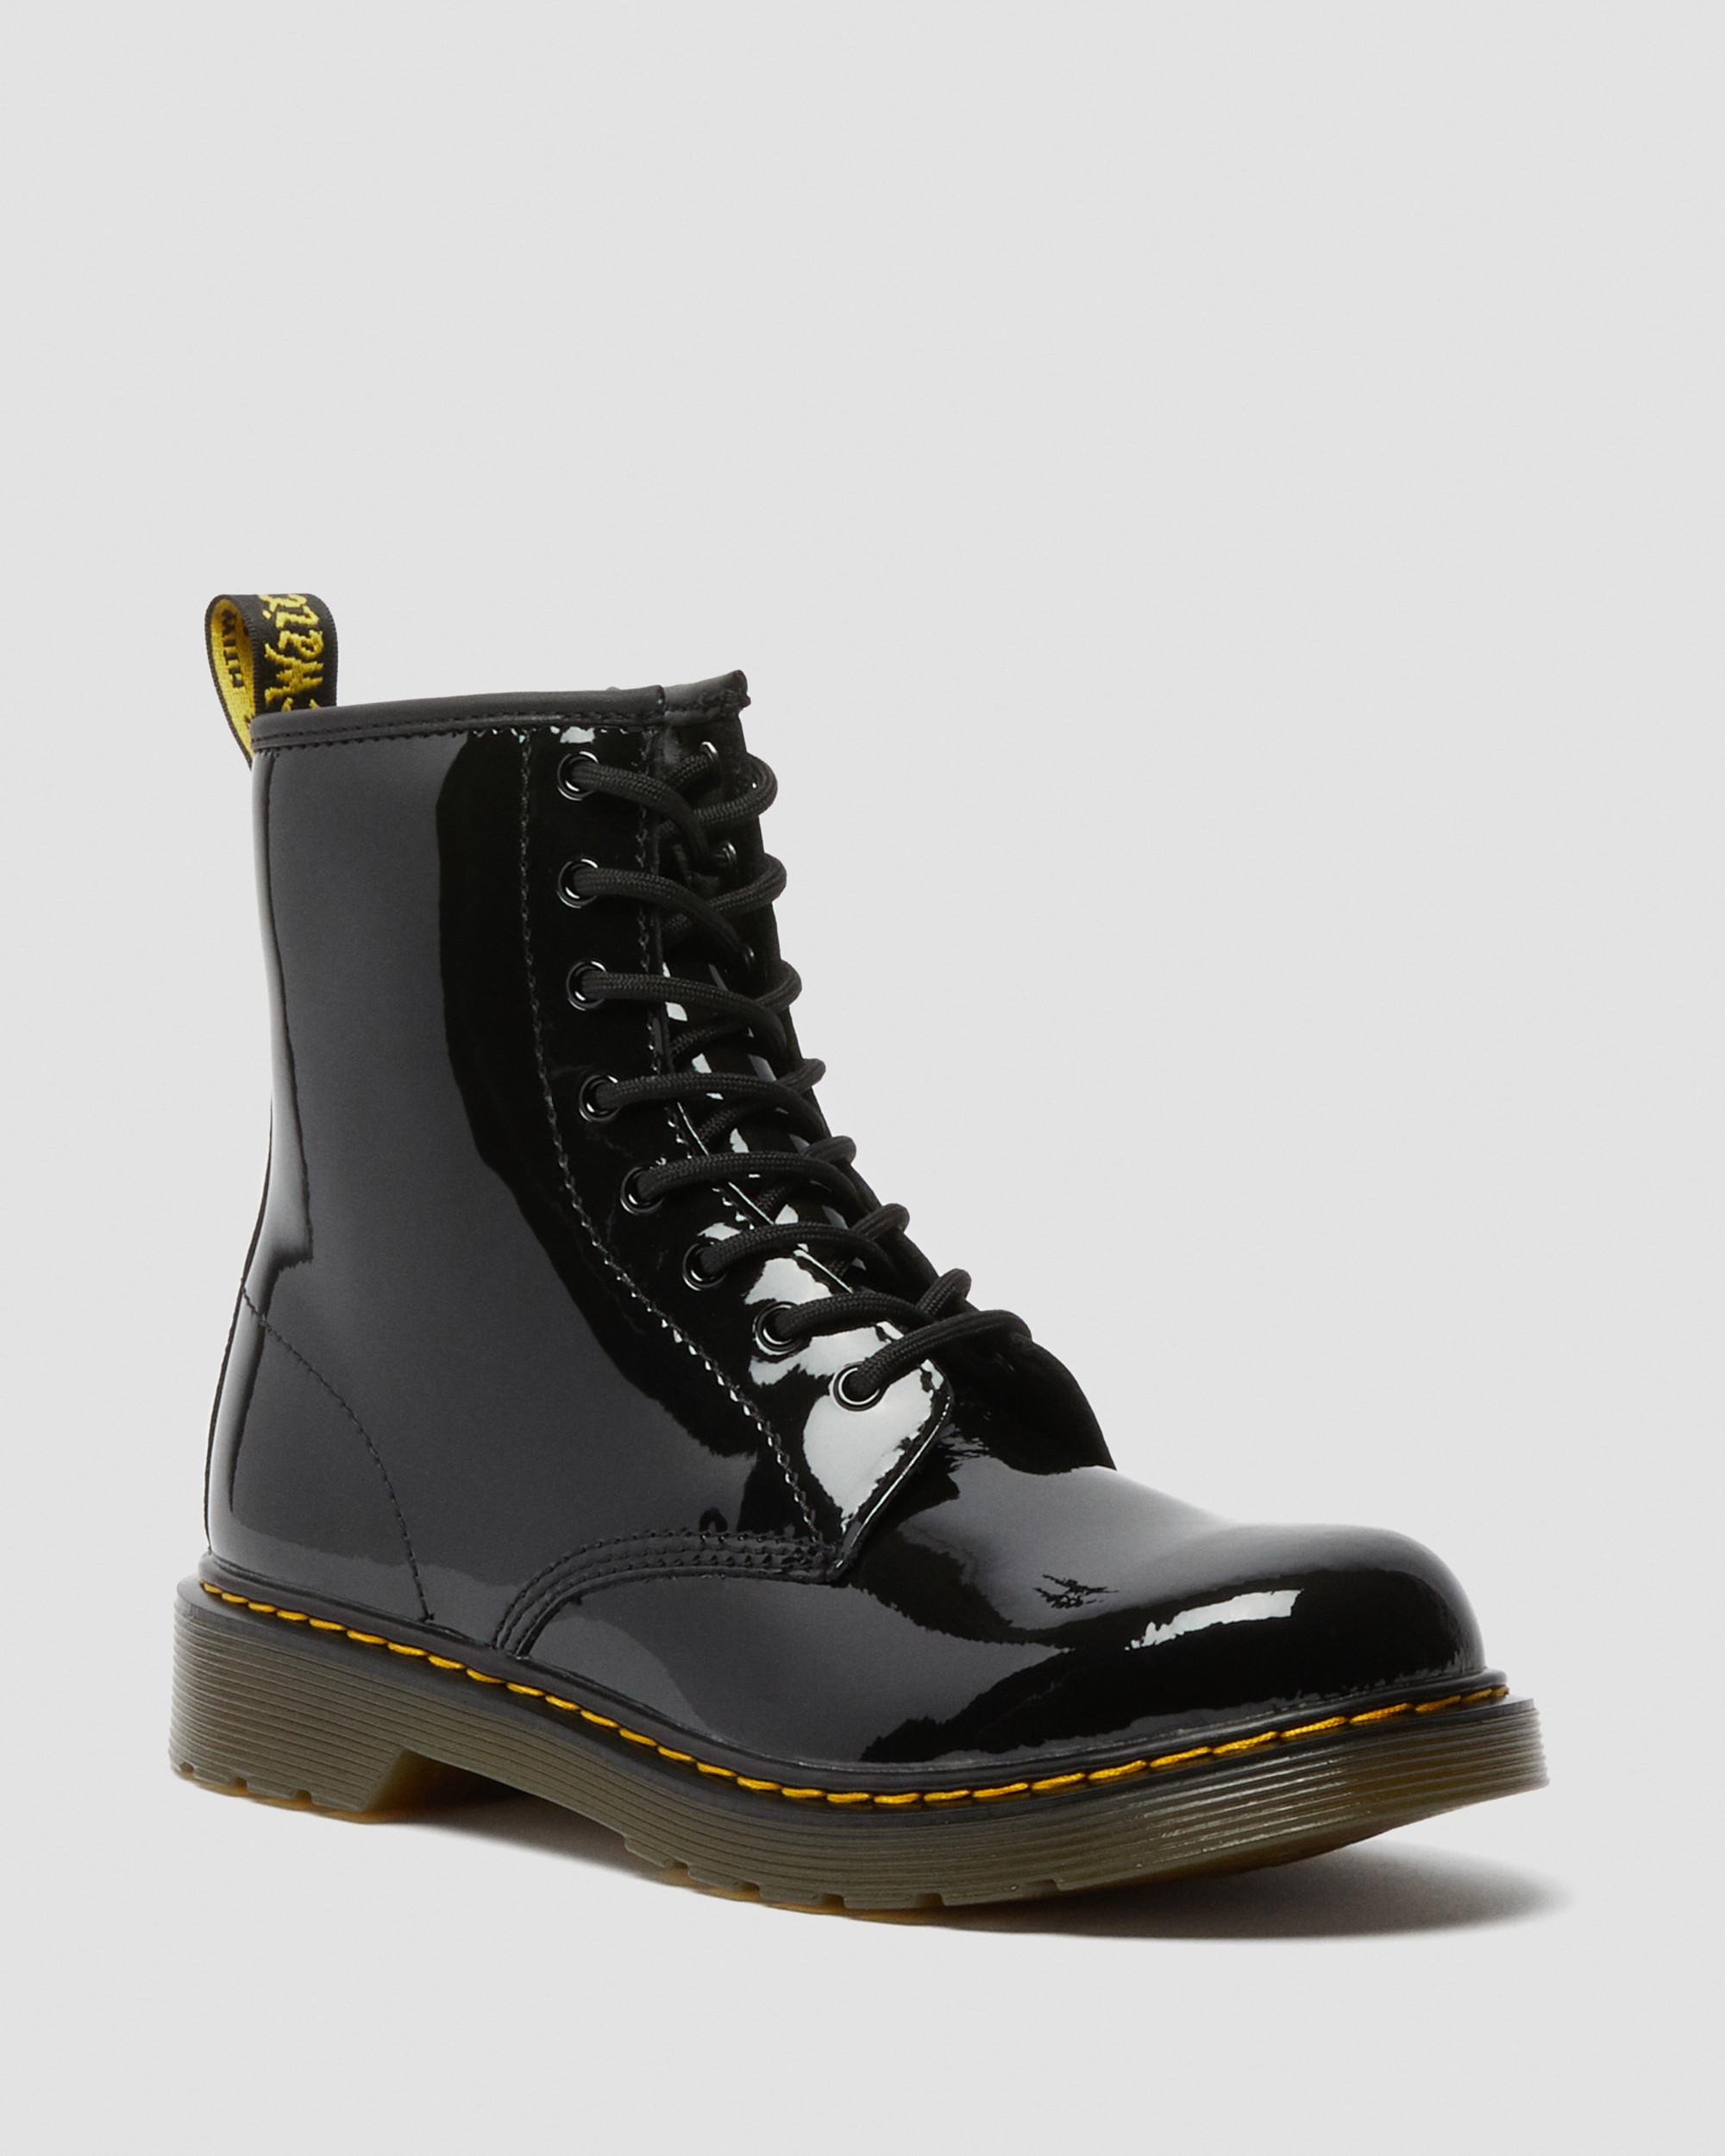 Youth 1460 Patent Leather Lace Up Boots in Black | Dr. Martens